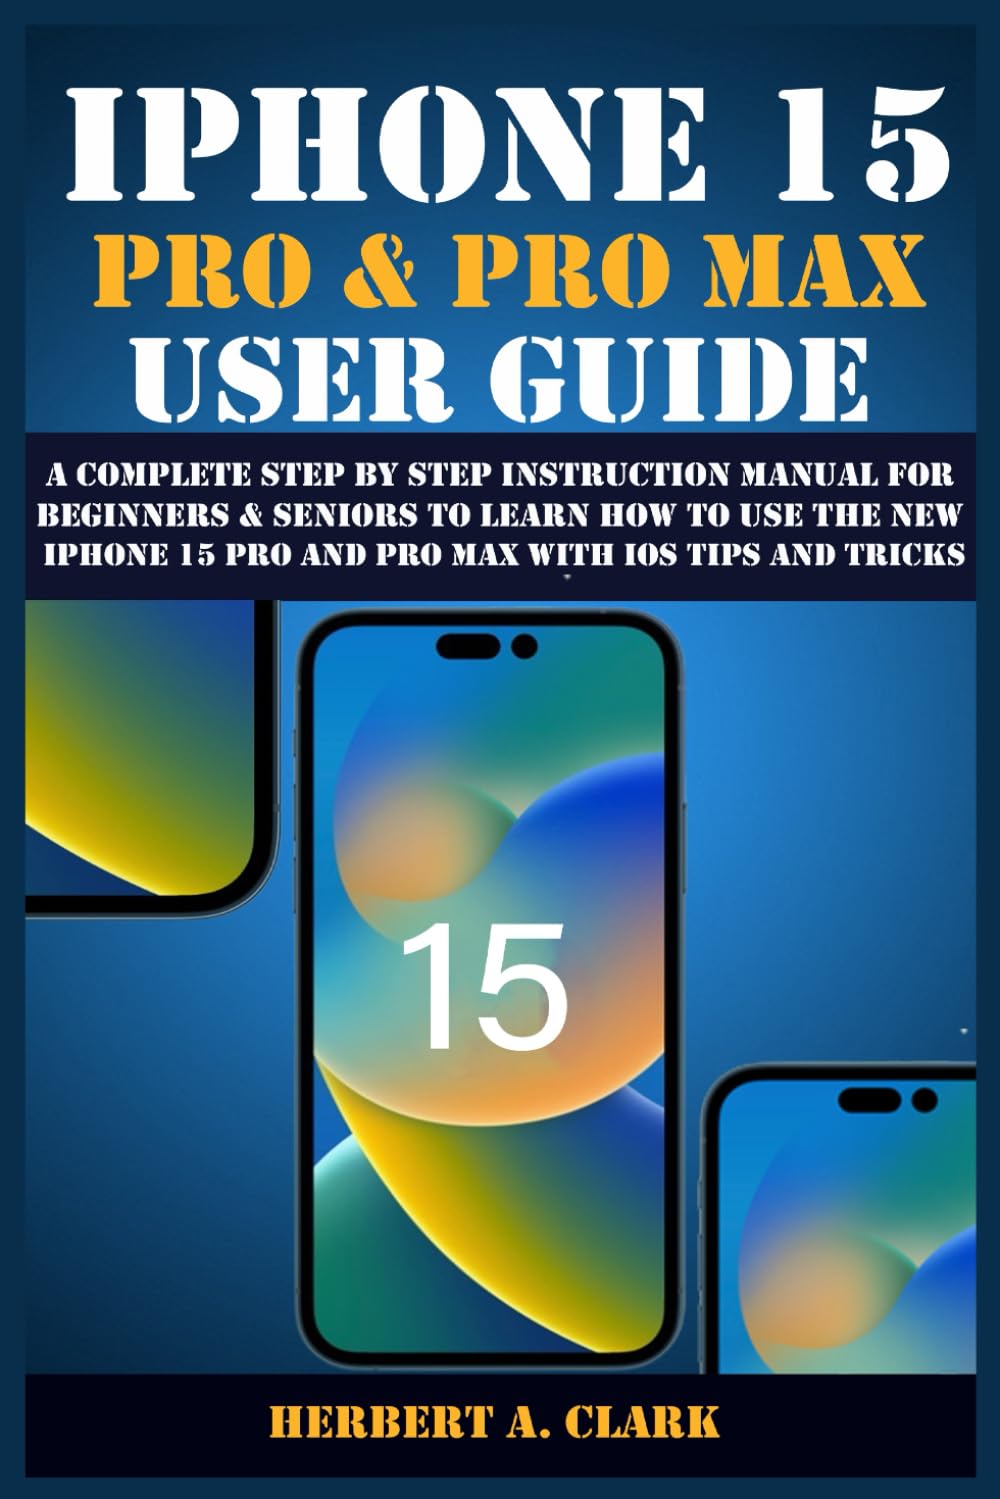 IPHONE 15 PRO & PRO MAX USER GUIDE: A Complete Step By Step Instruction Manual for Beginners & Seniors to Learn How to Use the New iPhone 15 Pro And ... Tips & Tricks (Apple Device Manuals by Clark)